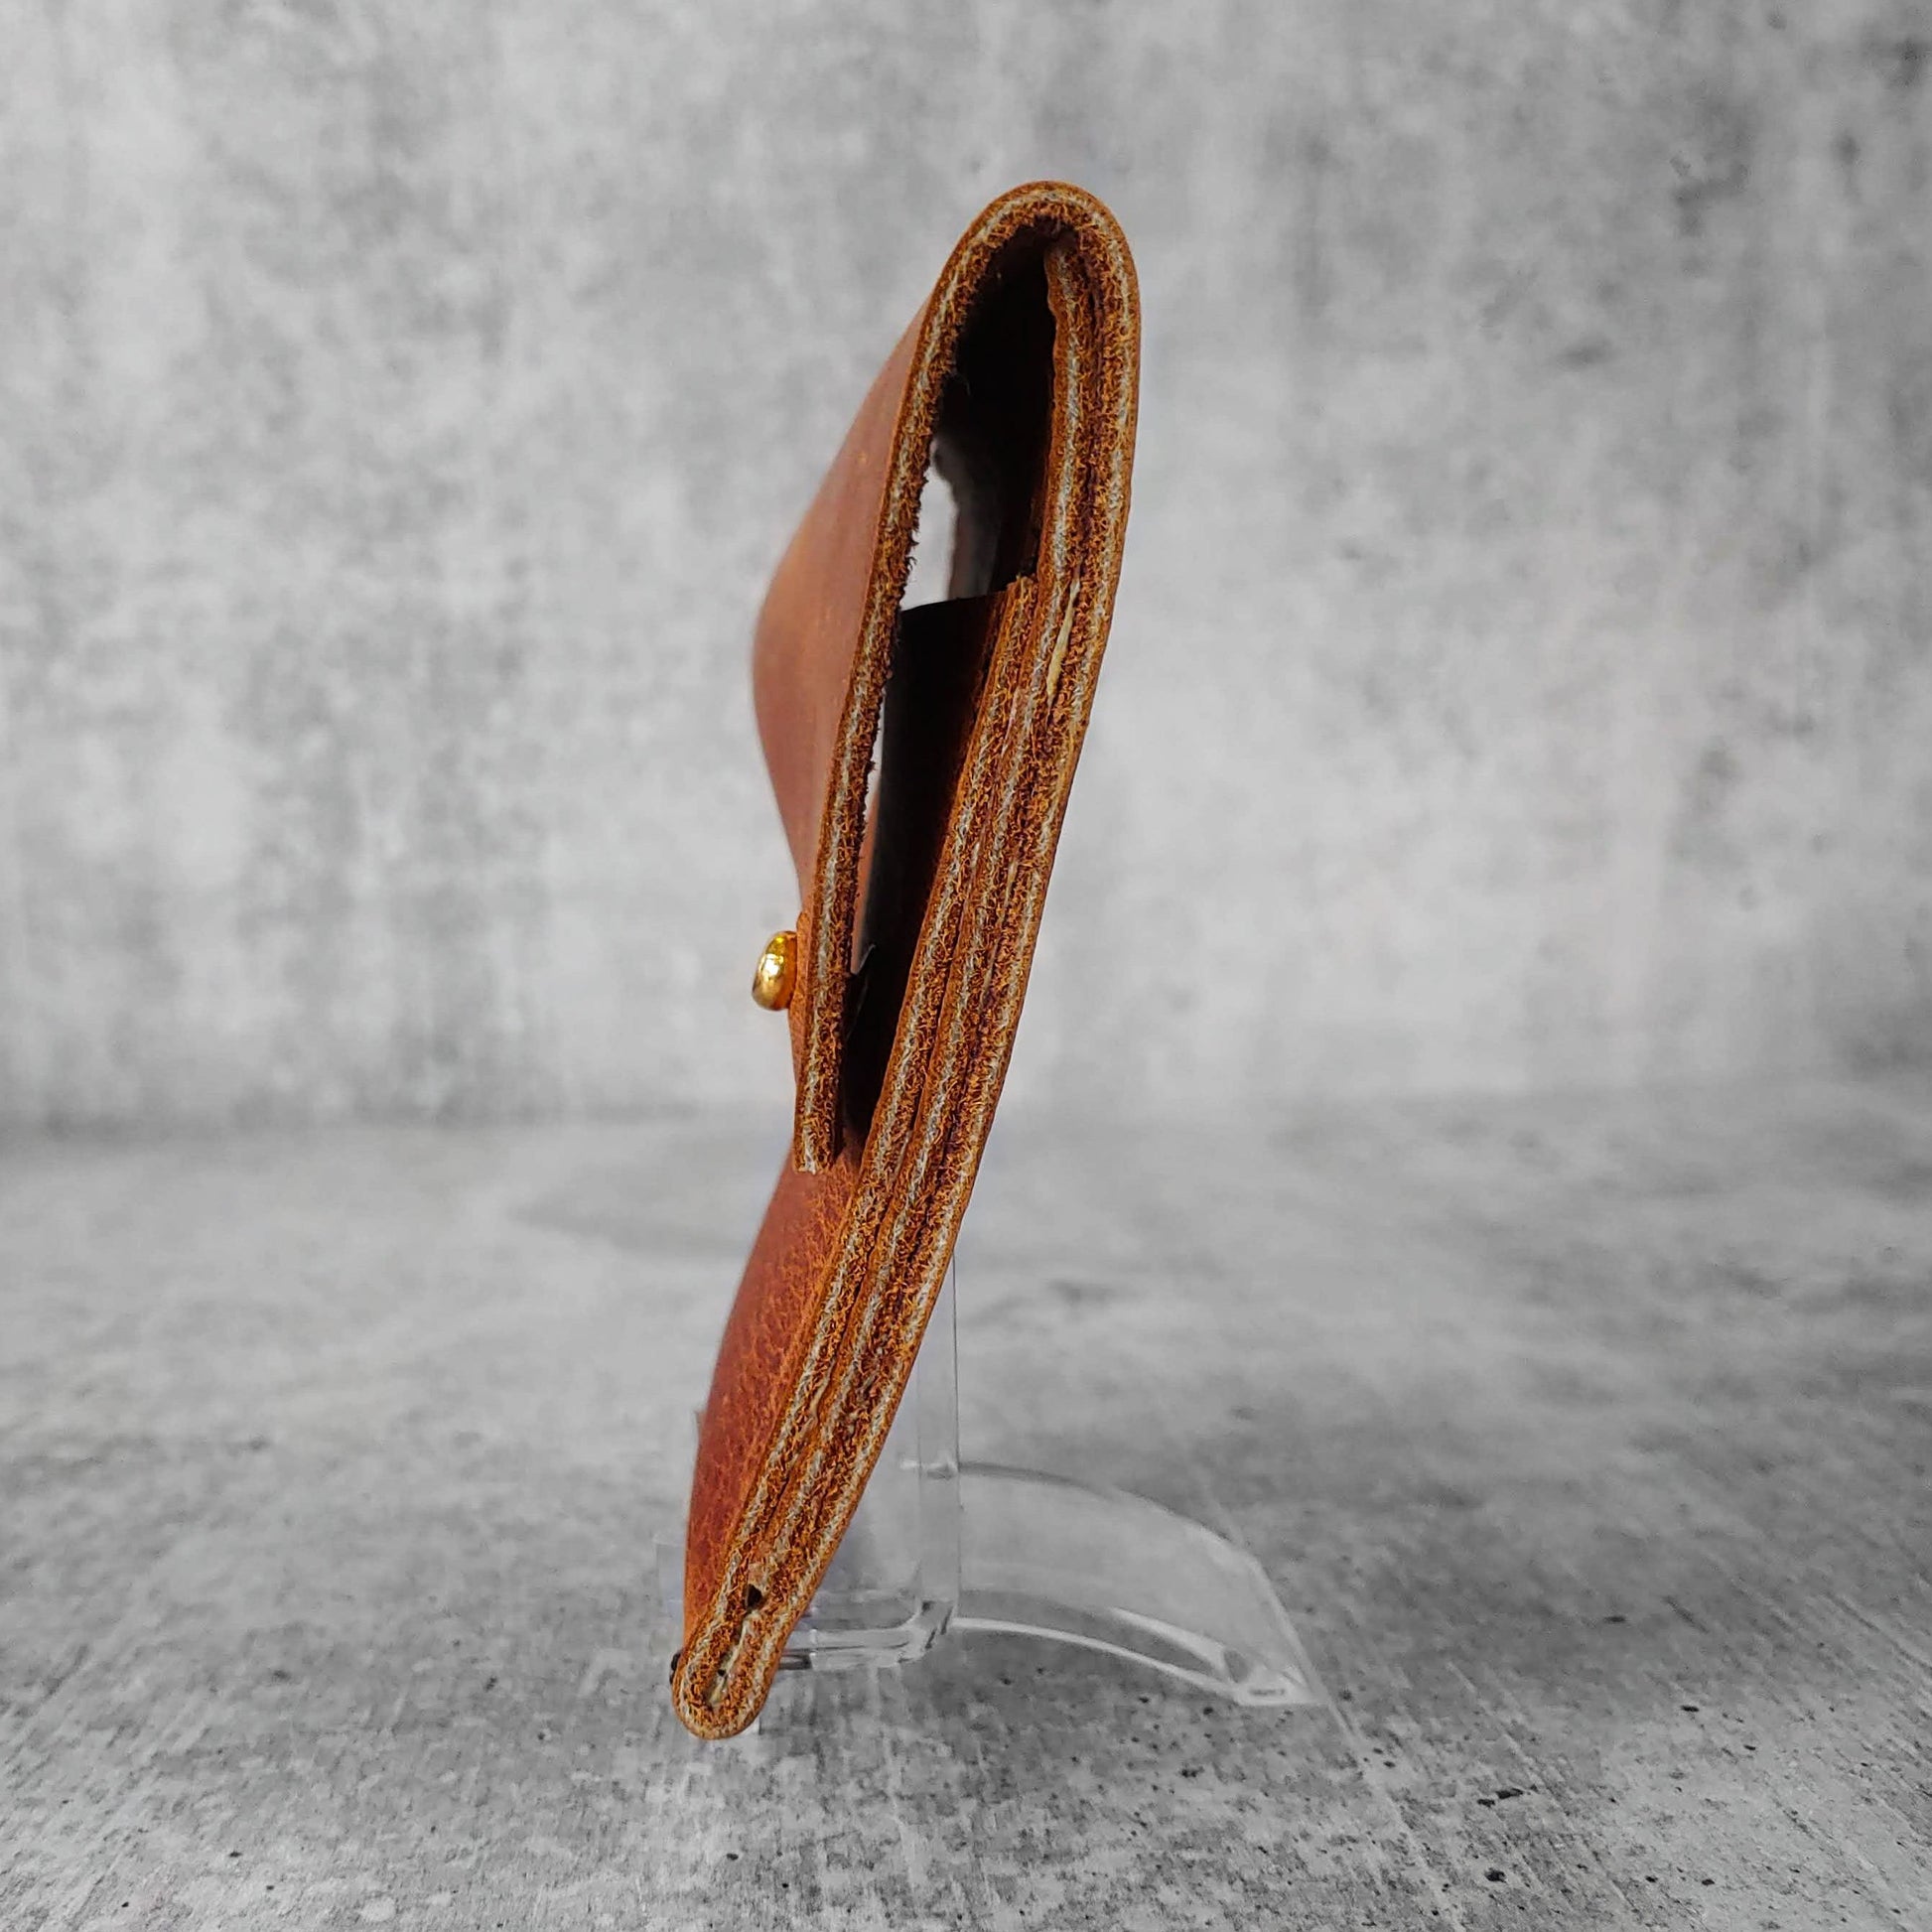 Side view of "soft leather wallet right" in pecan brown against a concrete background.